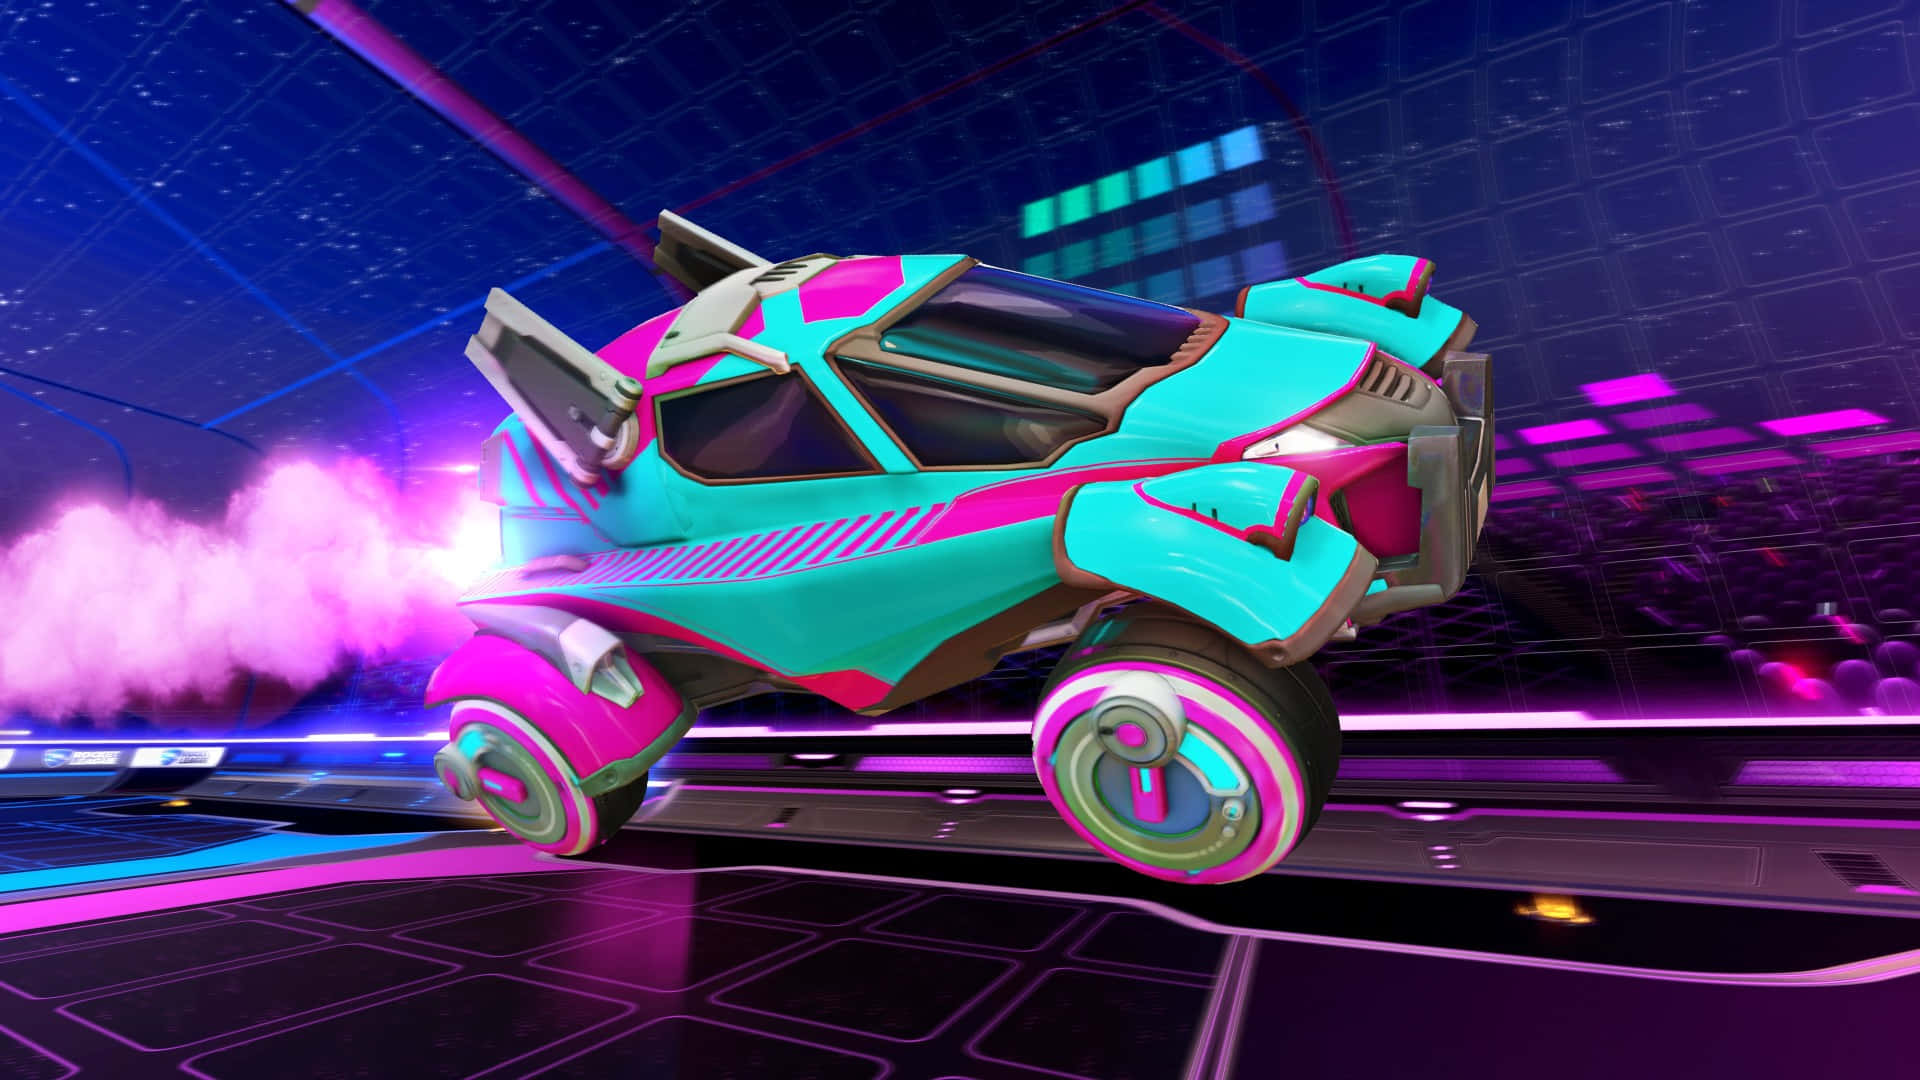 A Blue And Pink Car In A Space